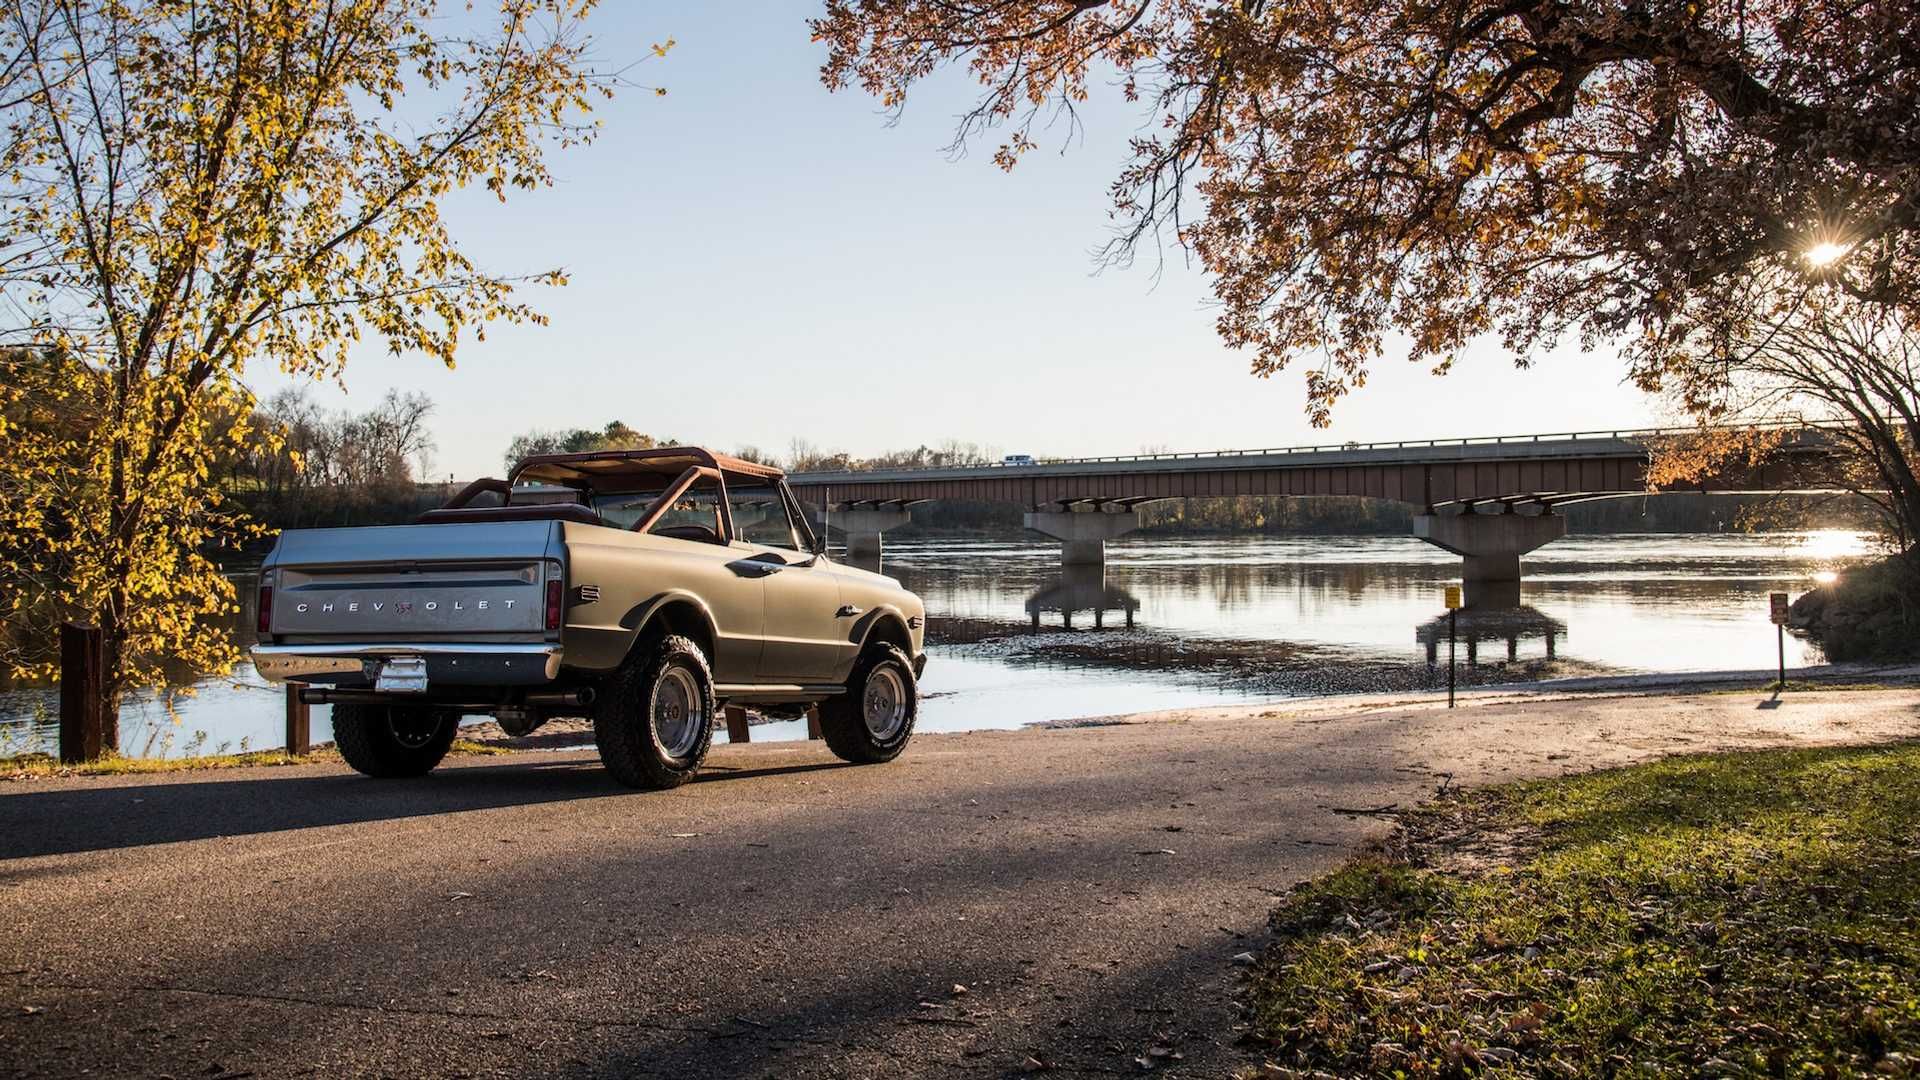 Wallpaper Of The Day: K5 Chevy Blazer Restomod By RingBrothers Top Speed. Chevy, All terrain tyres, Chevrolet